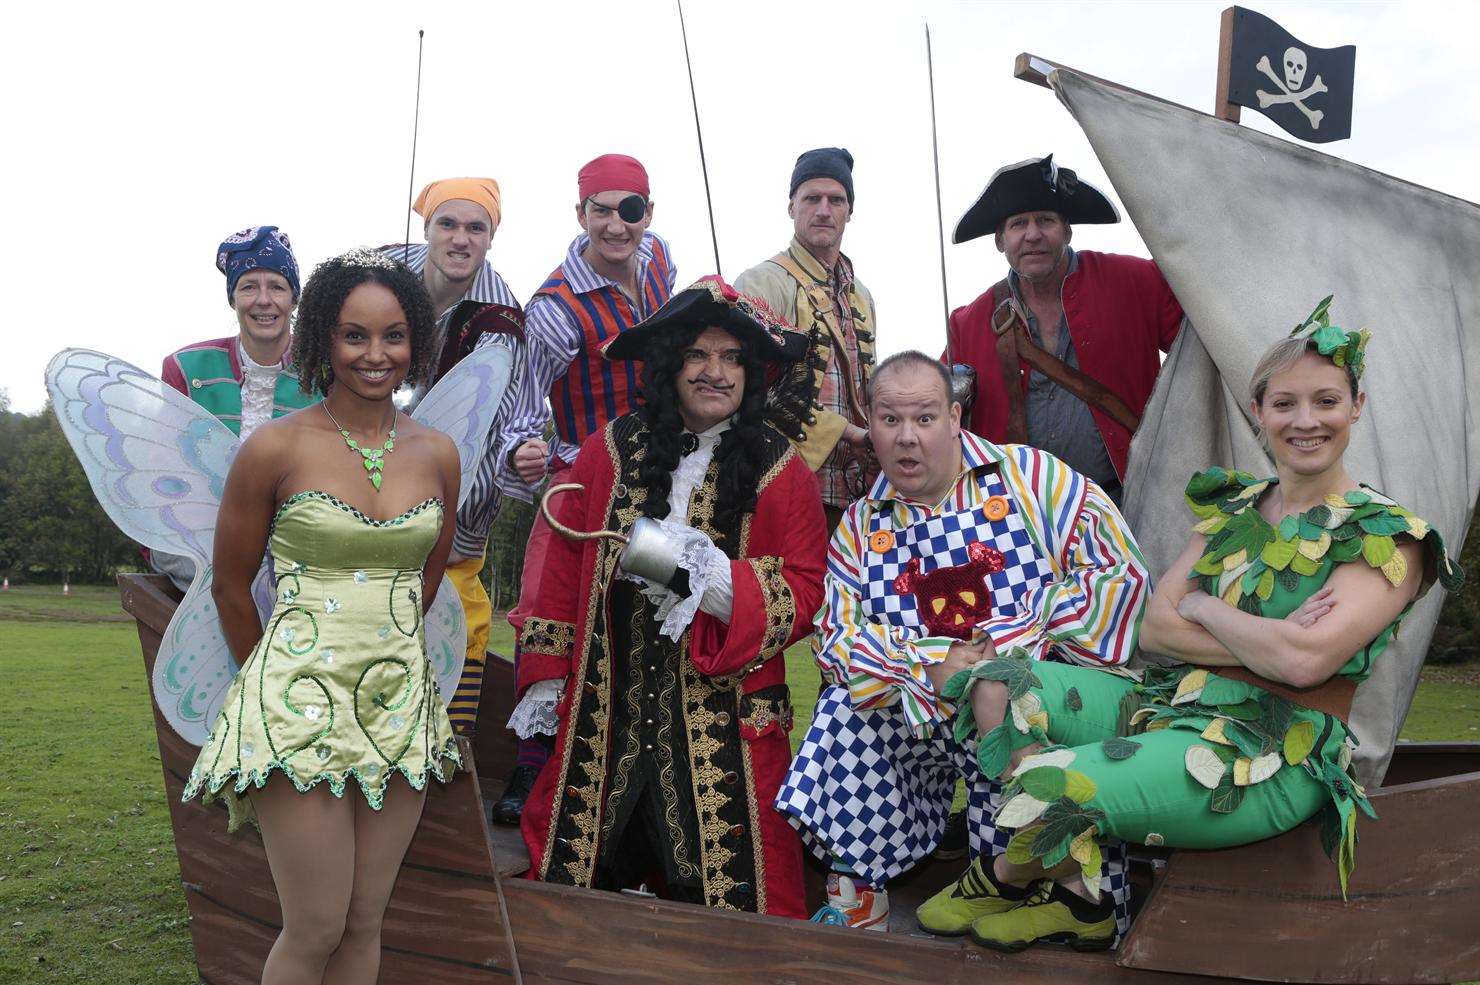 The crew of Peter Pan will be performing the panto later in the year